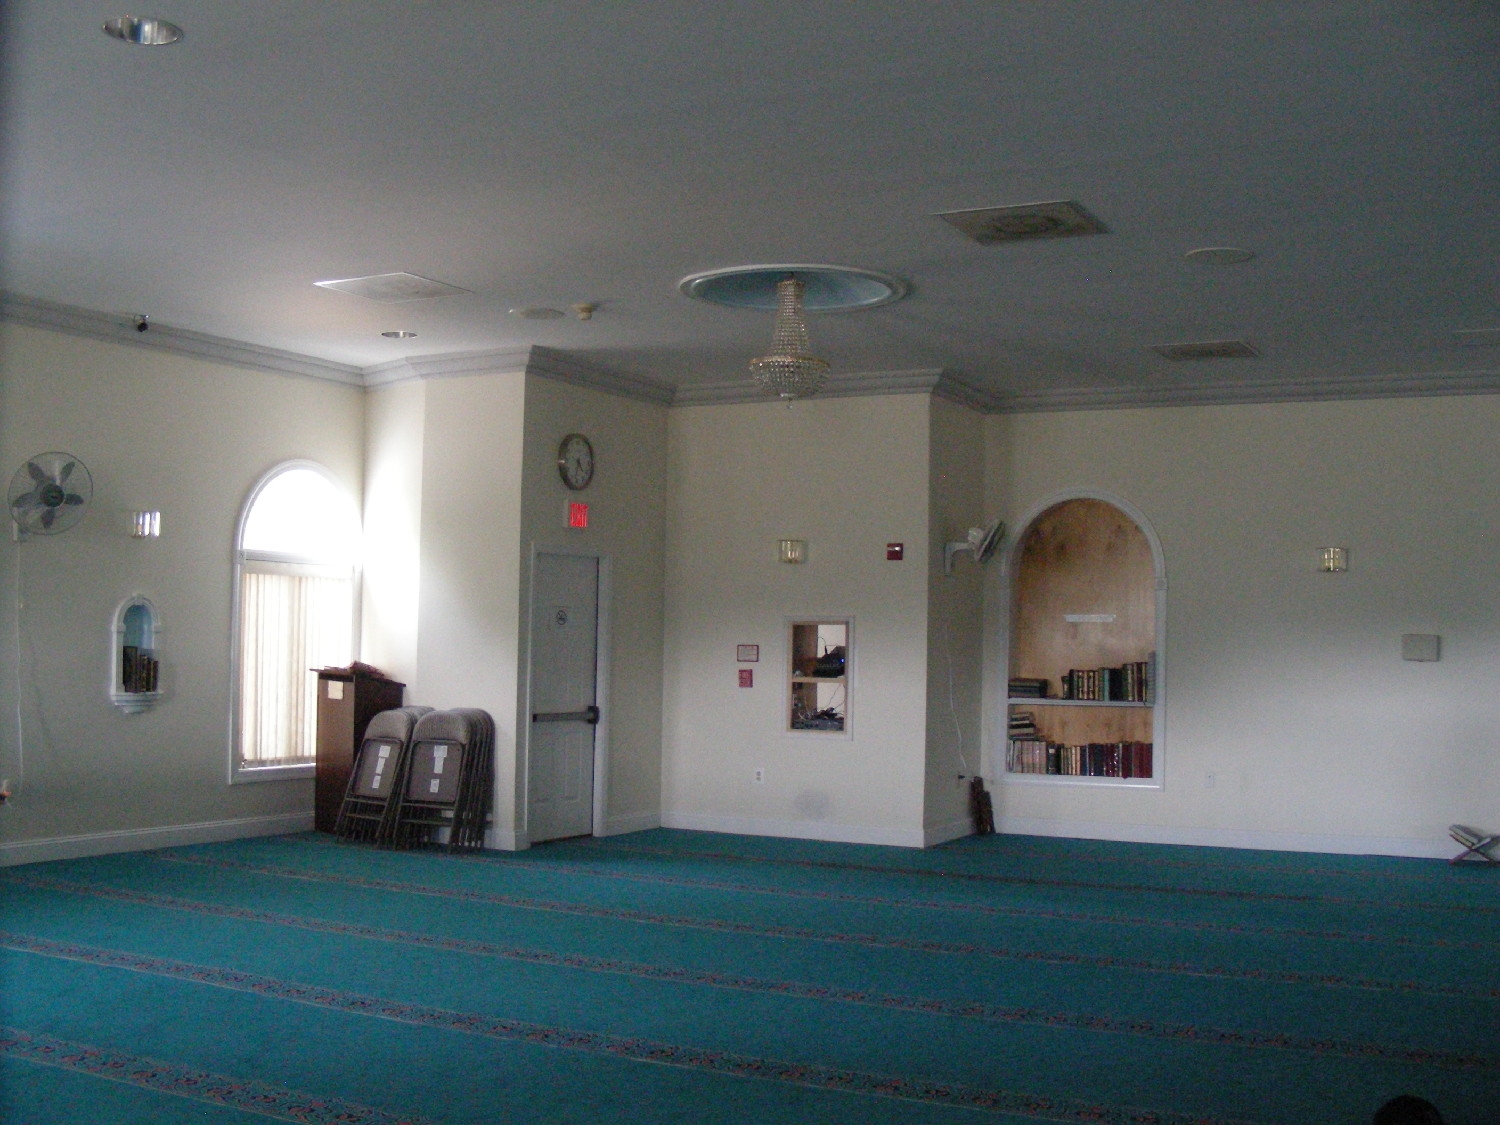 View to a corner of the prayer hall, with an entrance door